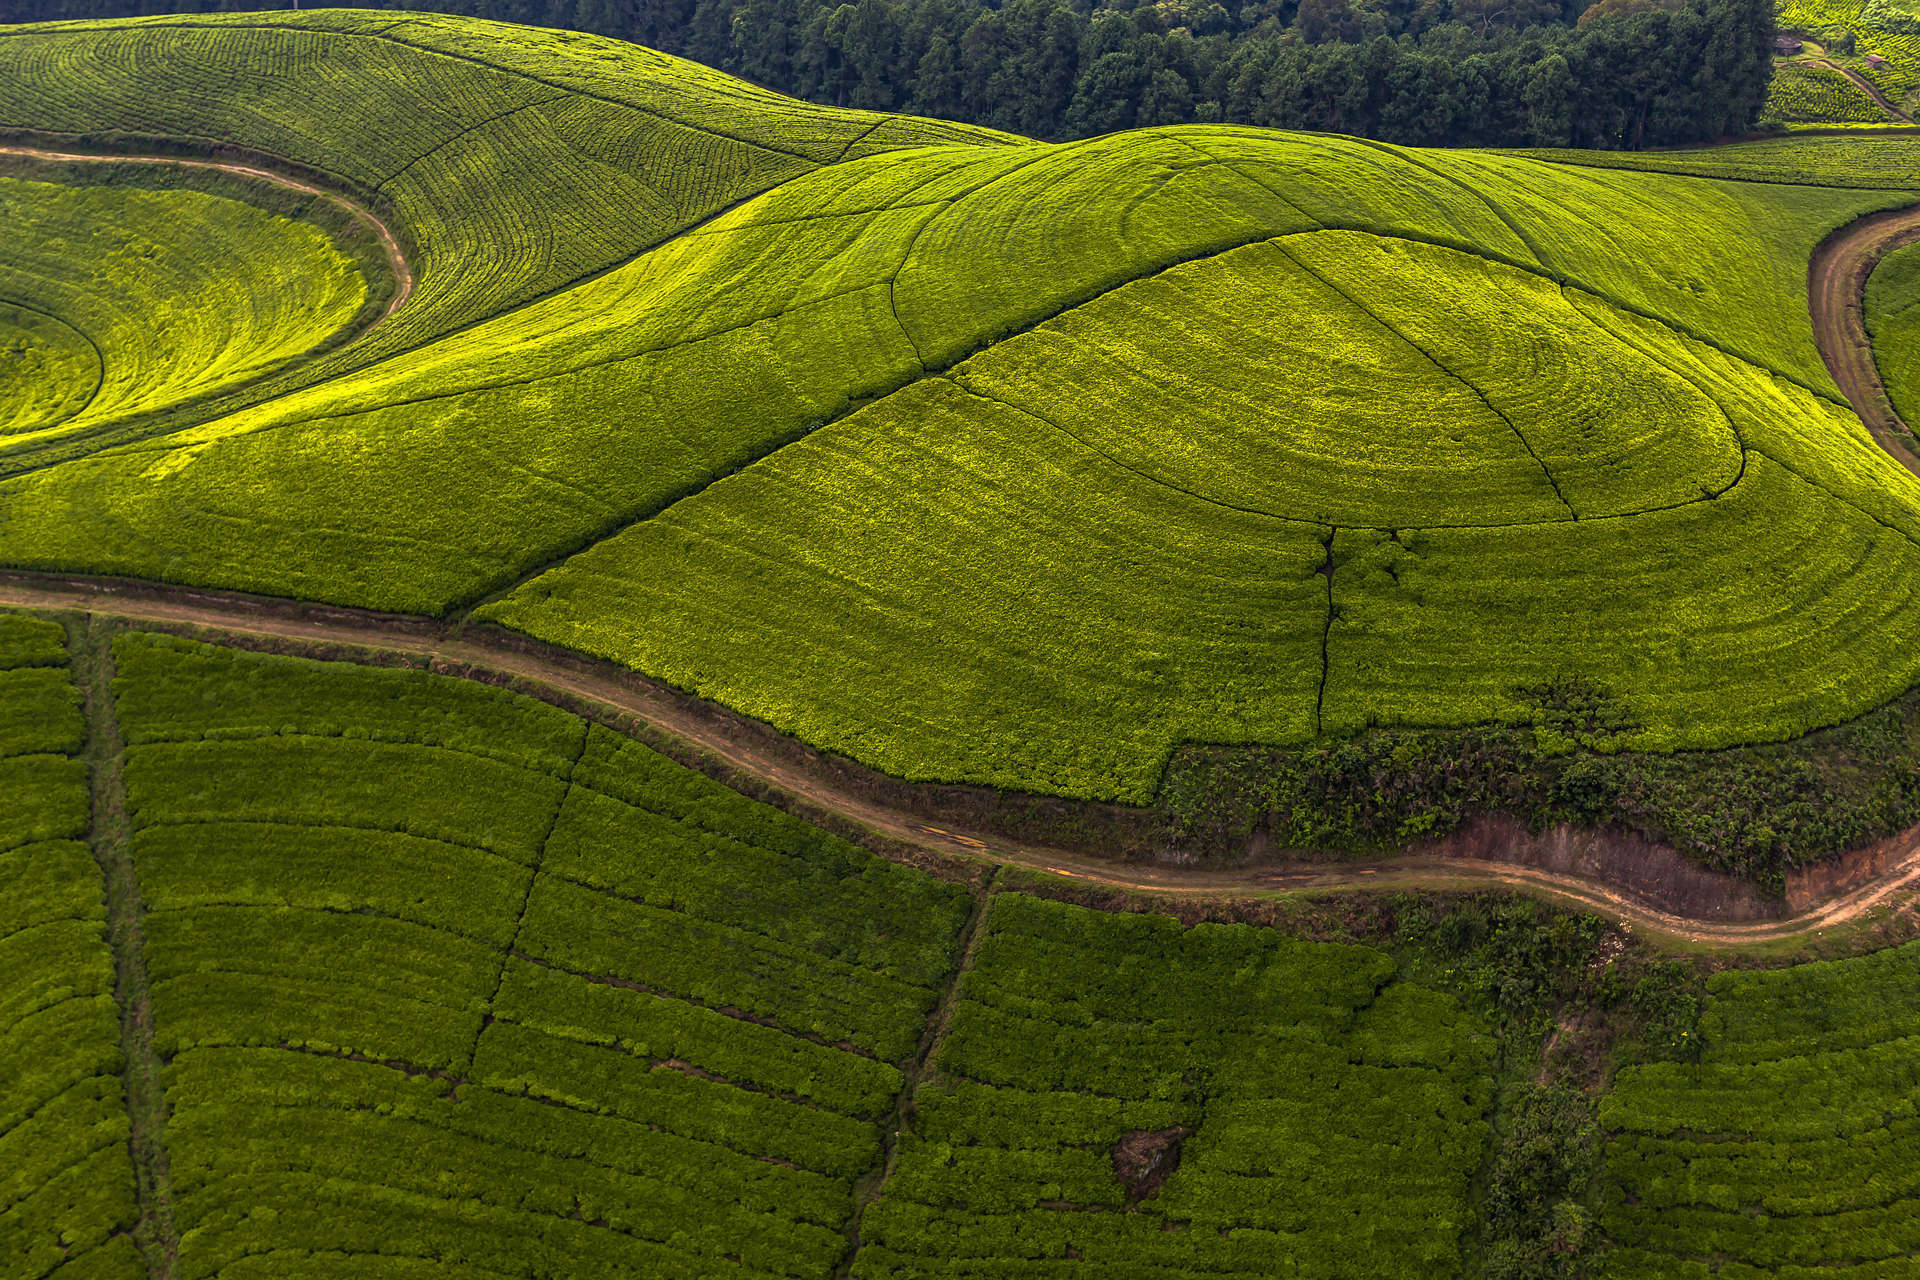 Rwanda produces fantastic tea and the country's landscape is jewelled with rows of shiny green plantations